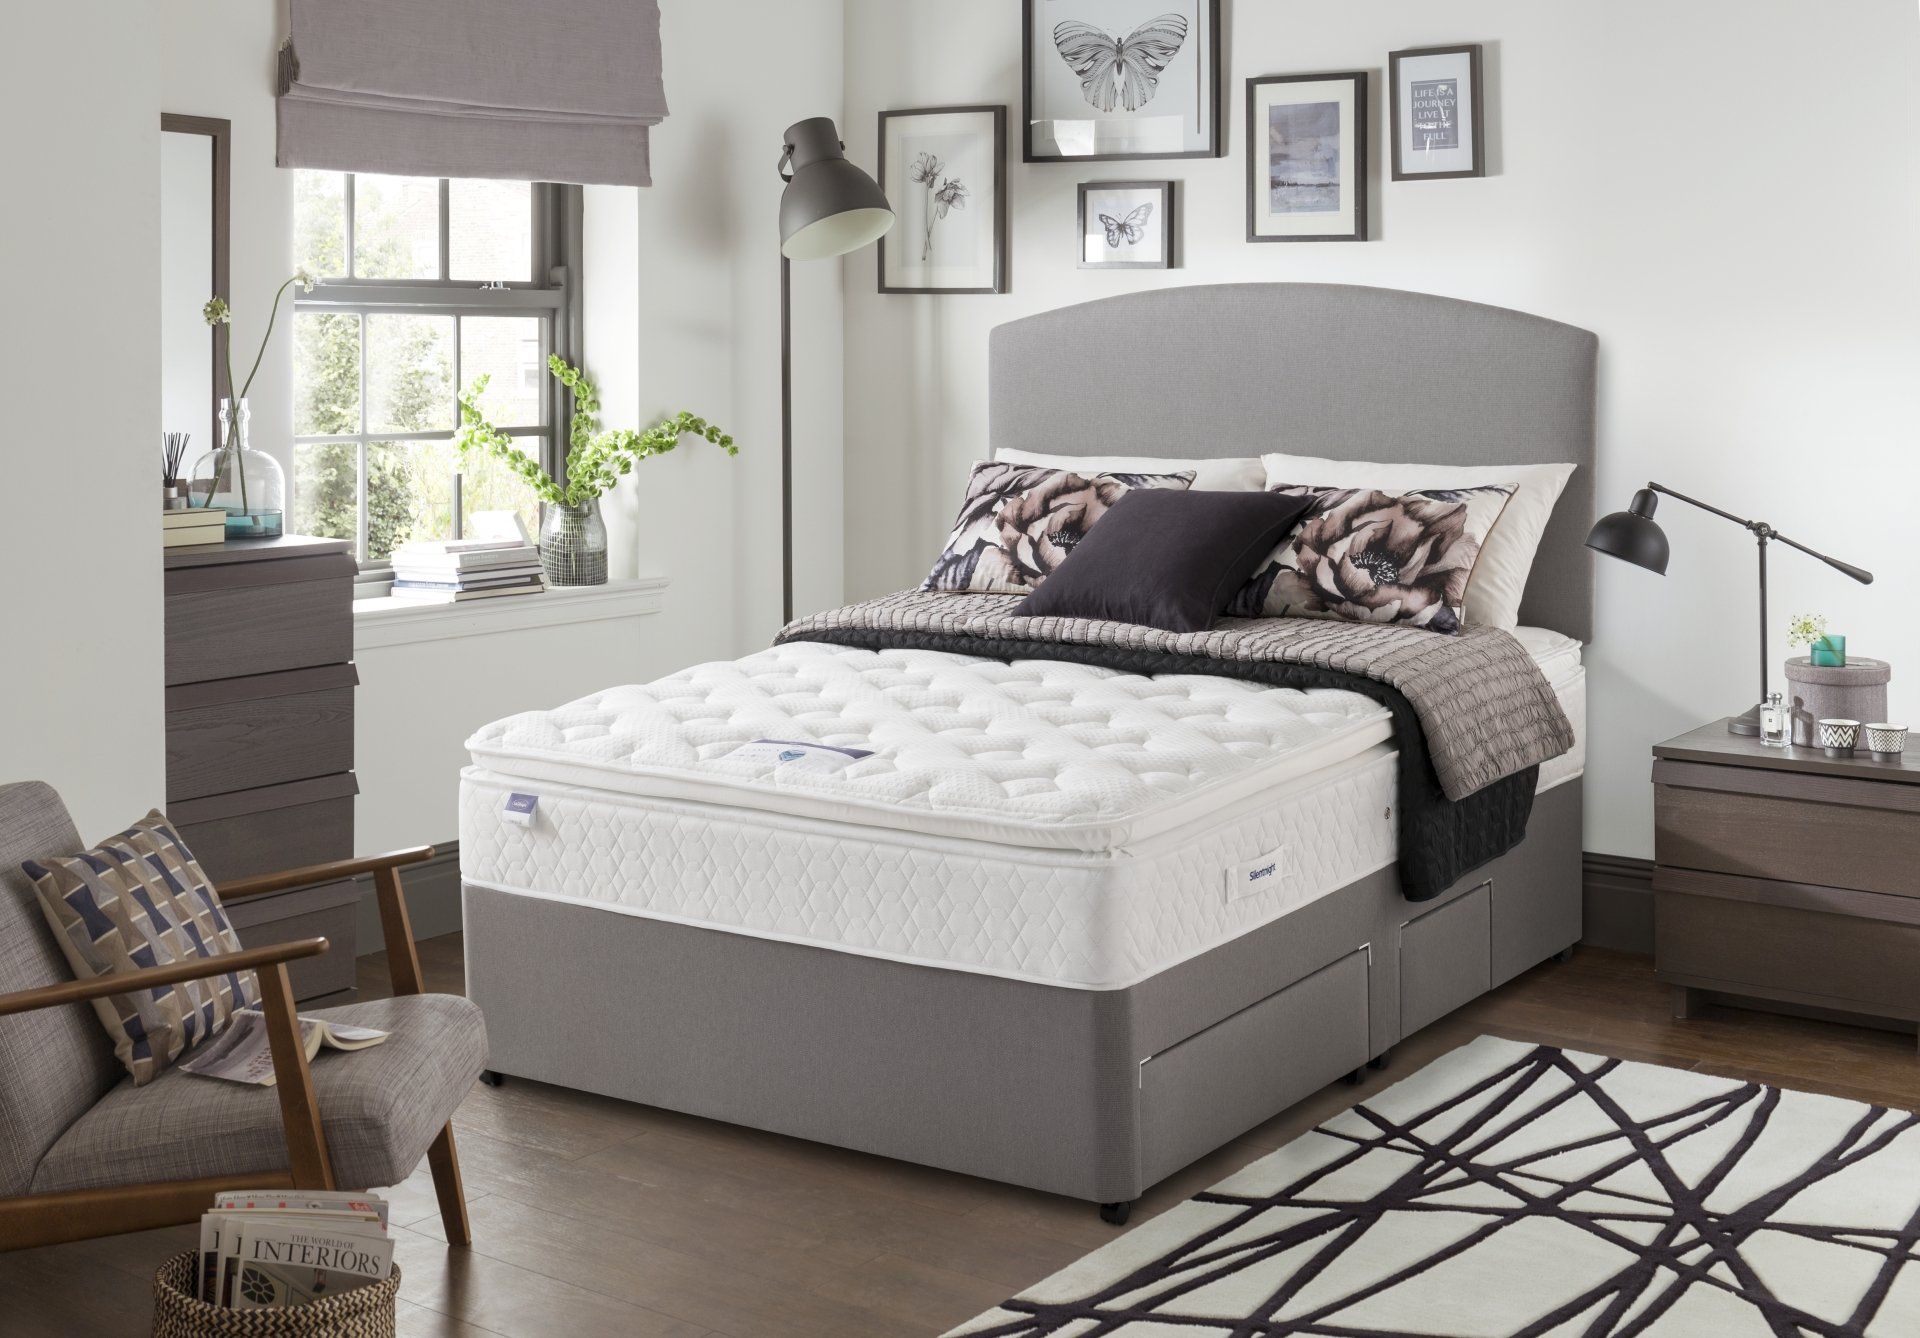 Divan bed with drawers underneath